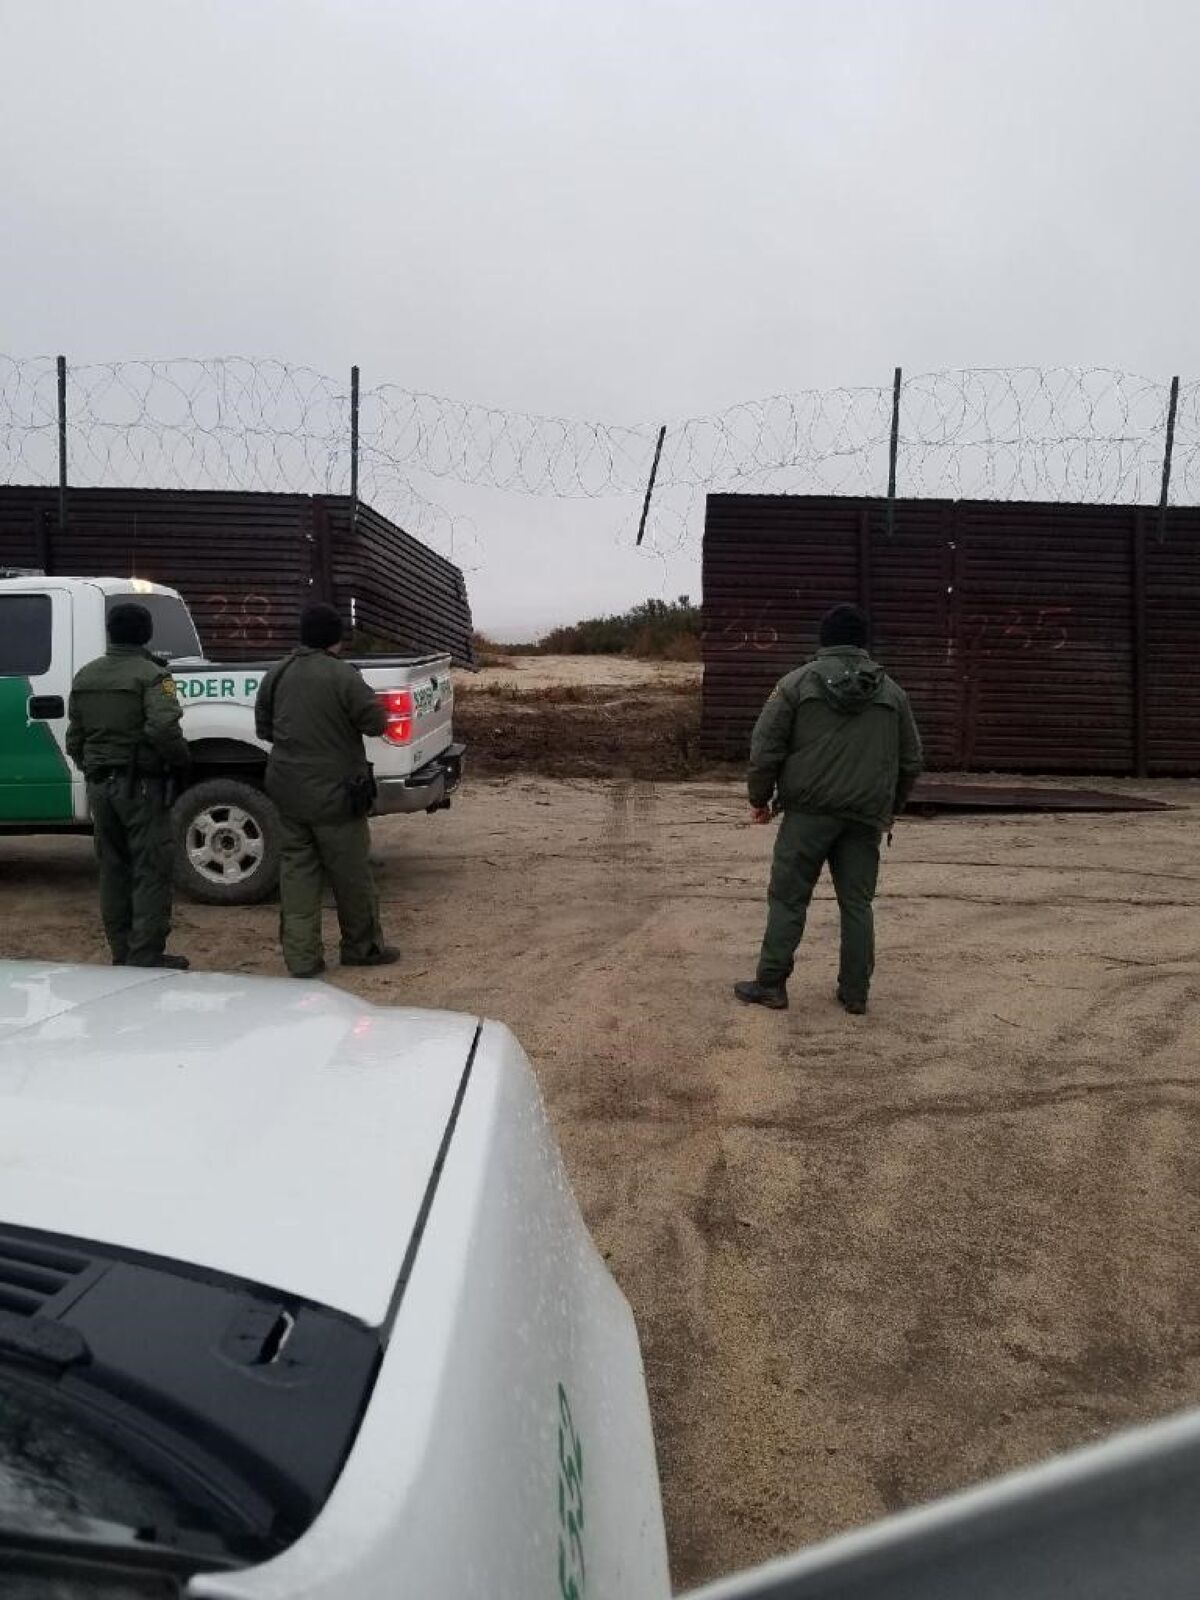 Border Patrol agents said smugglers cut through a border wall near Campo made of old landing mats and drove a stolen truck into the U.S. on Wednesday afternoon. Sixteen people were arrested.